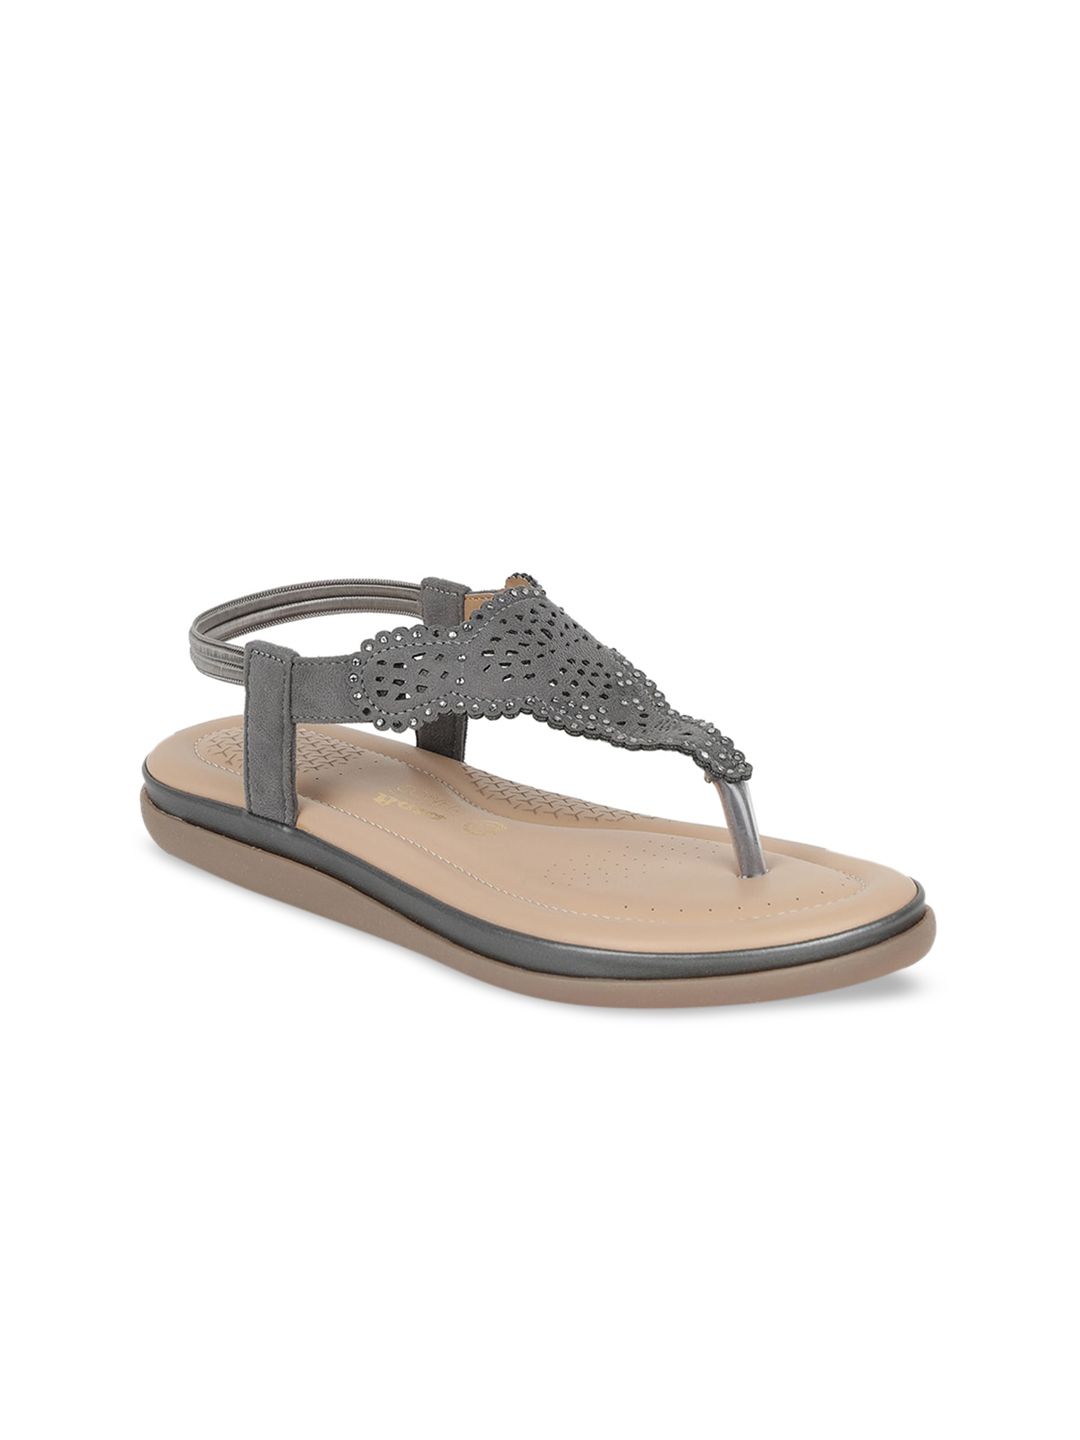 Bata Women Grey T-Strap Flats with Laser Cuts Price in India